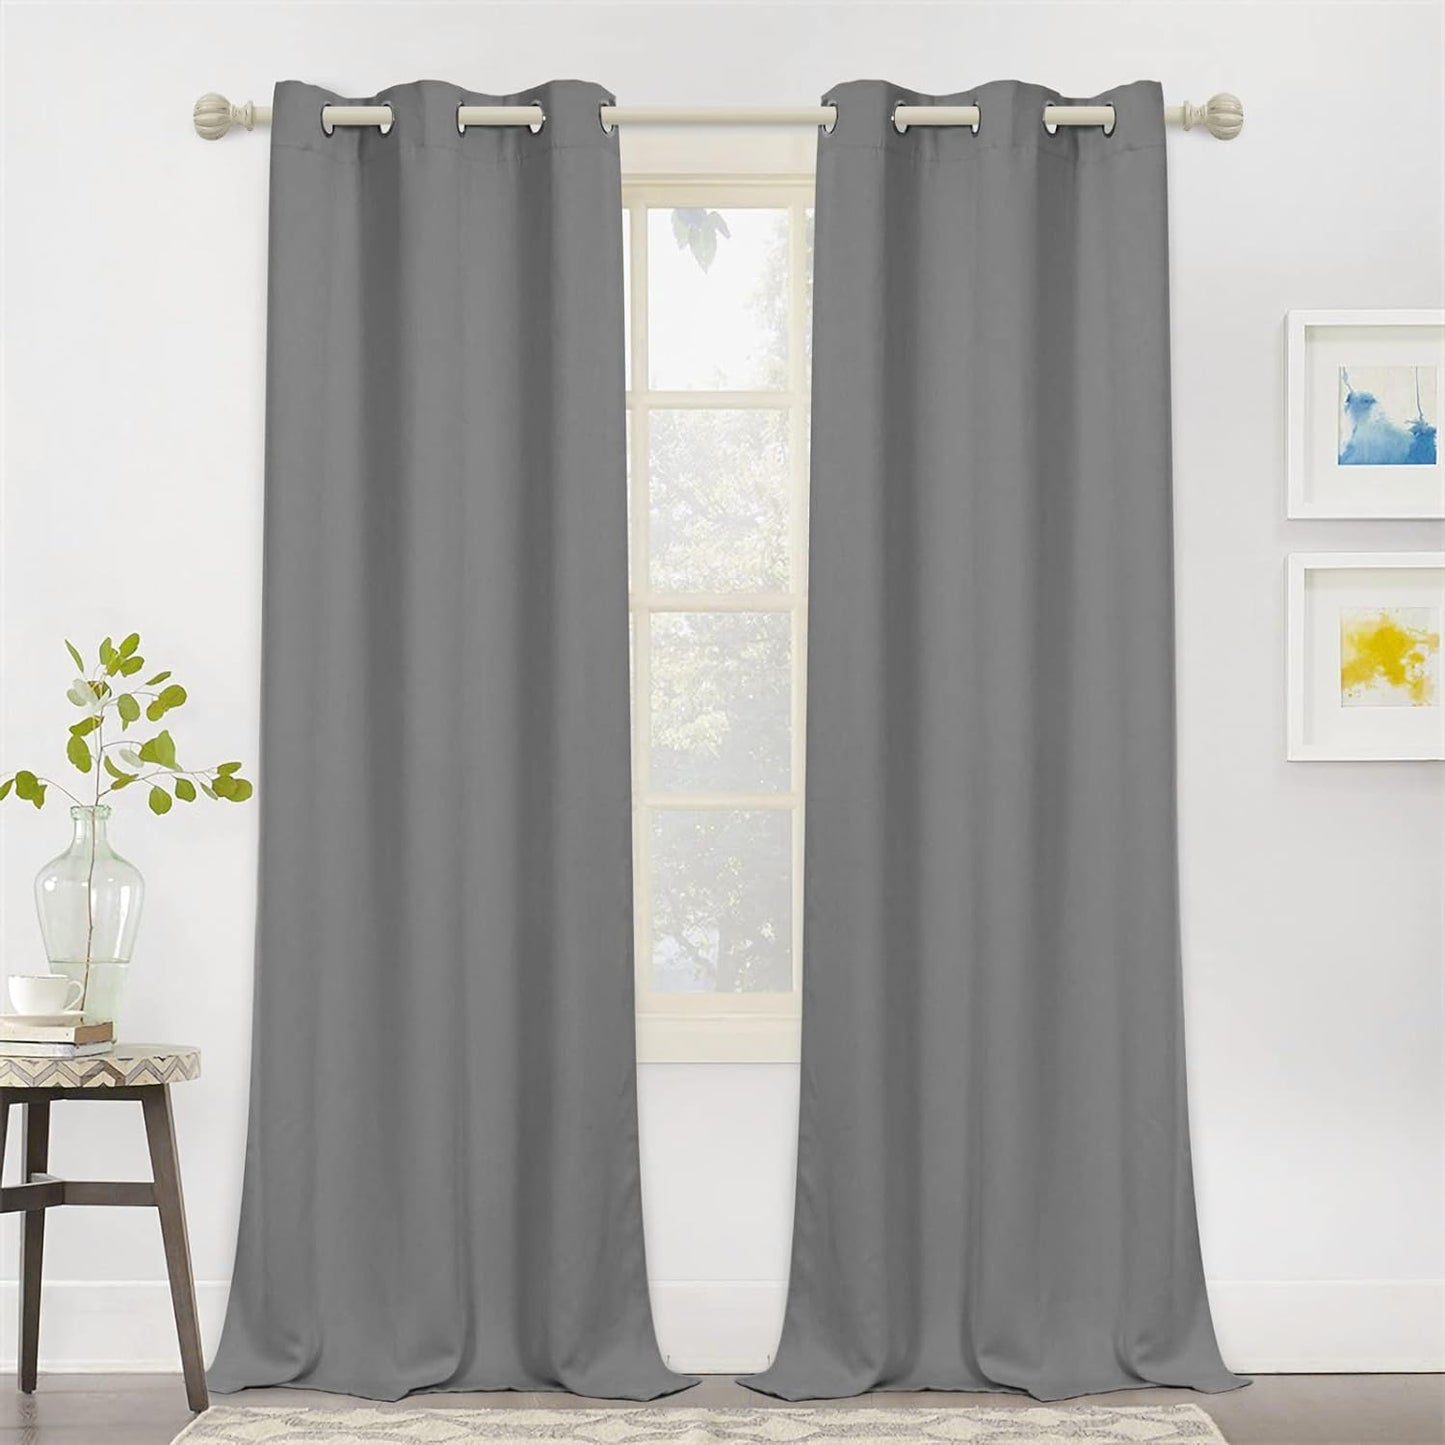 MYSKY HOME Black Curtains for Bedroom 90 Inch Long Blackout Curtains for Living Room 2 Panels Thermal Insulated Grommet Room Darkening Curtains Privacy Protect Window Drapes, 52 X 90 Inches, Black  MYSKY HOME Grey 52W X 90L 